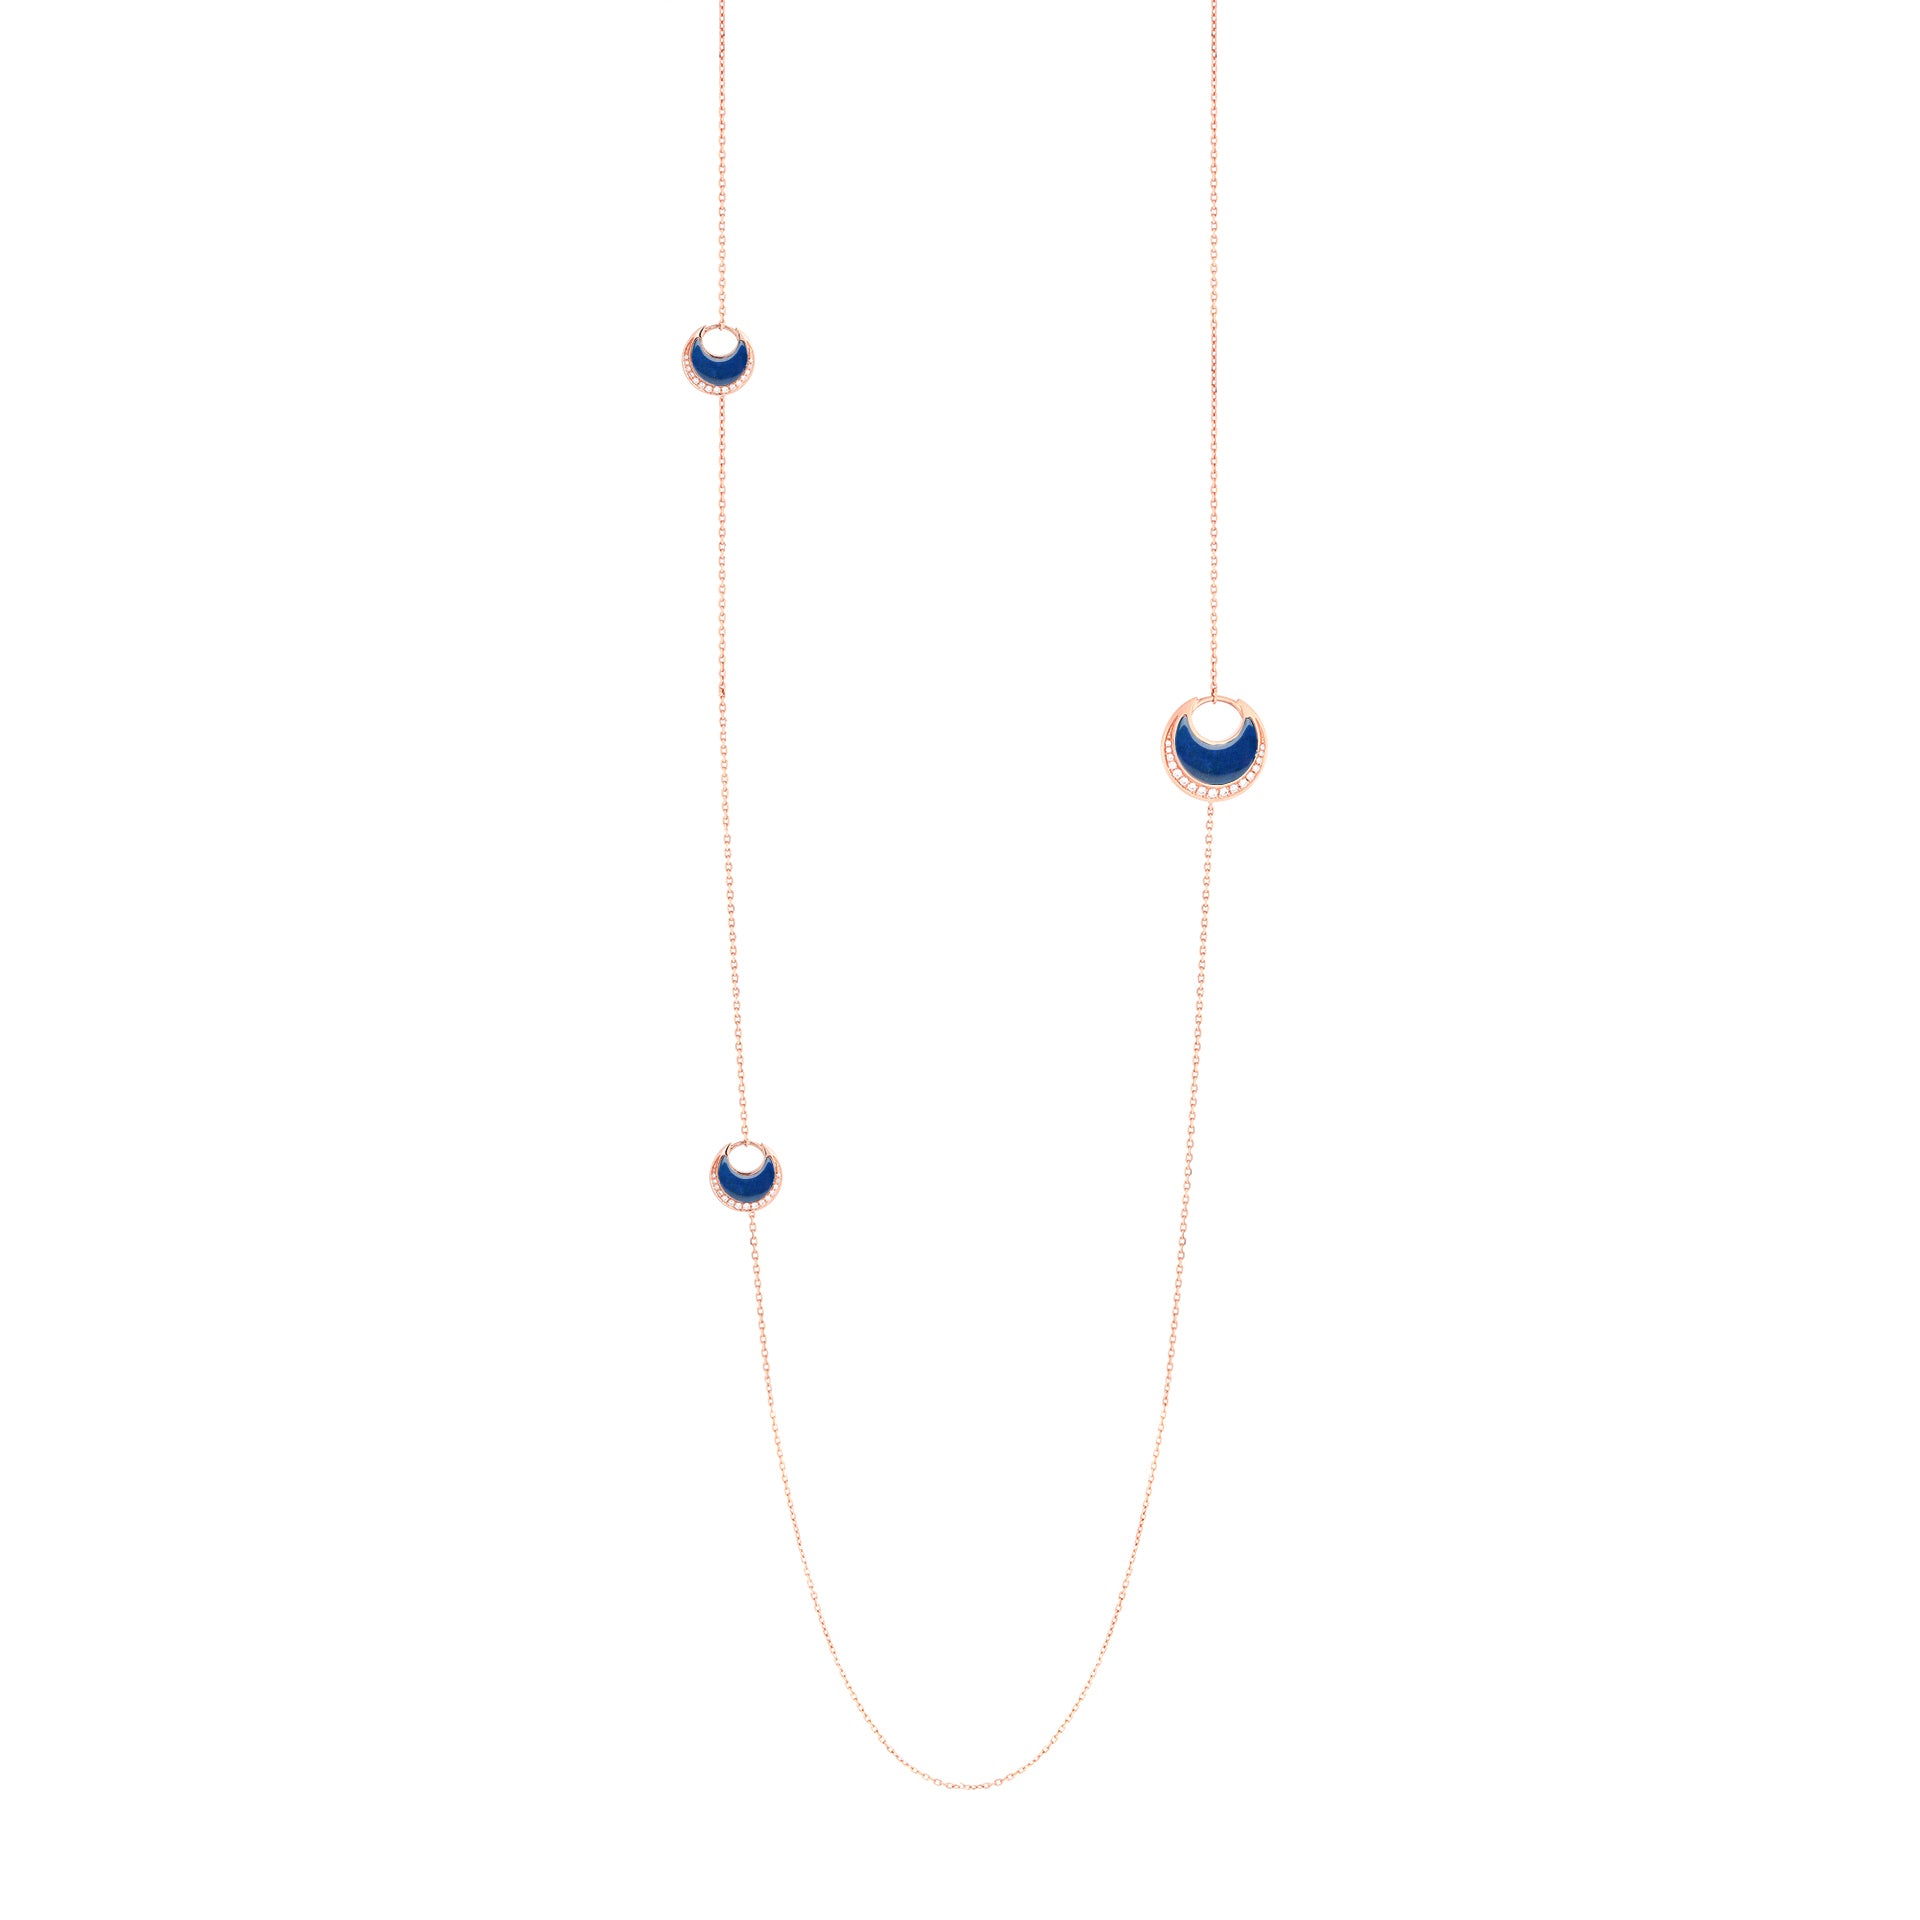 Al Hilal necklace in rose gold with lapis stones and diamonds